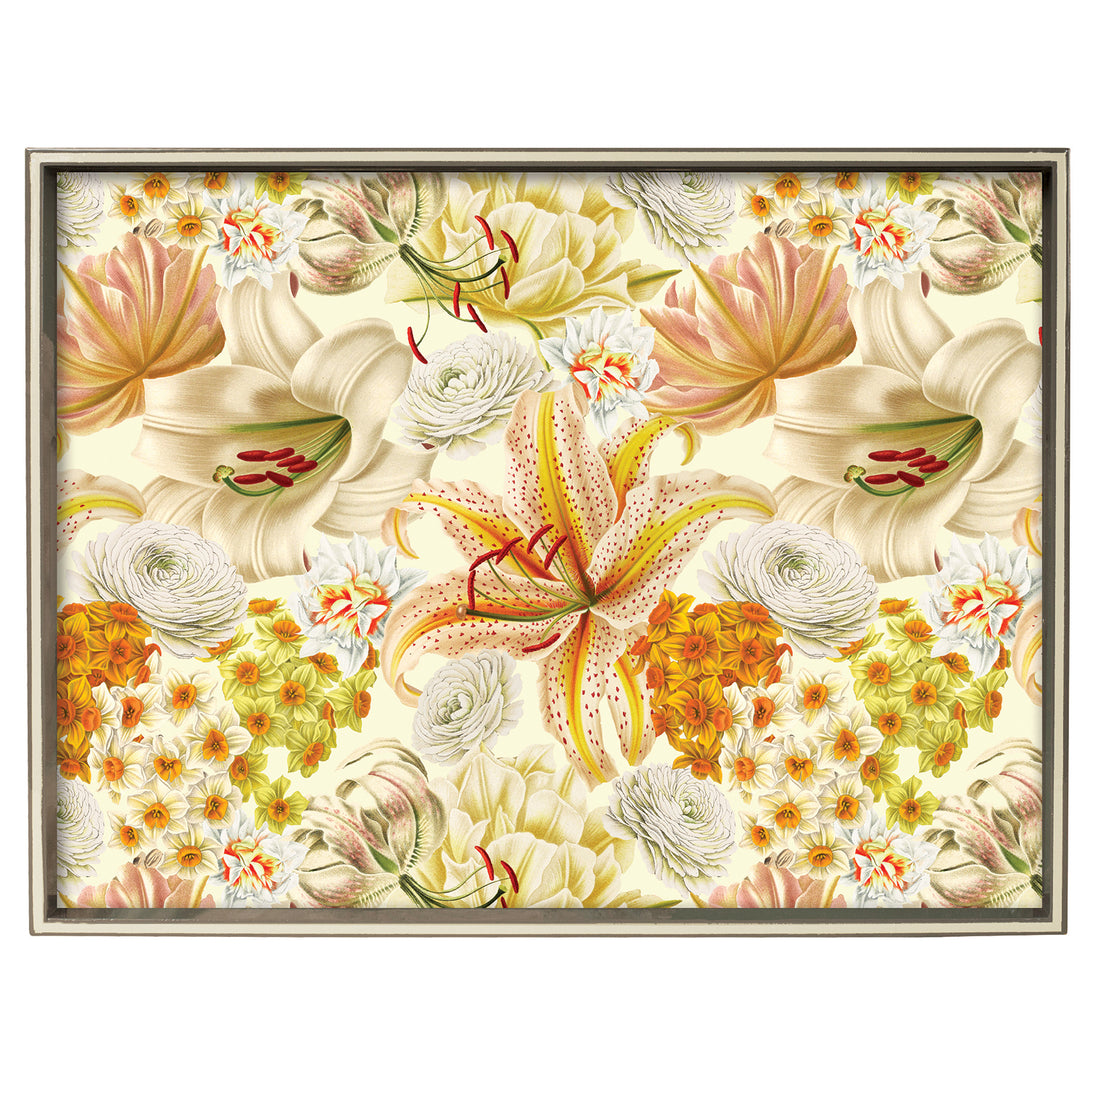 Rectangular Lacquer Art Serving Tray with Blooms Tray - rockflowerpaper